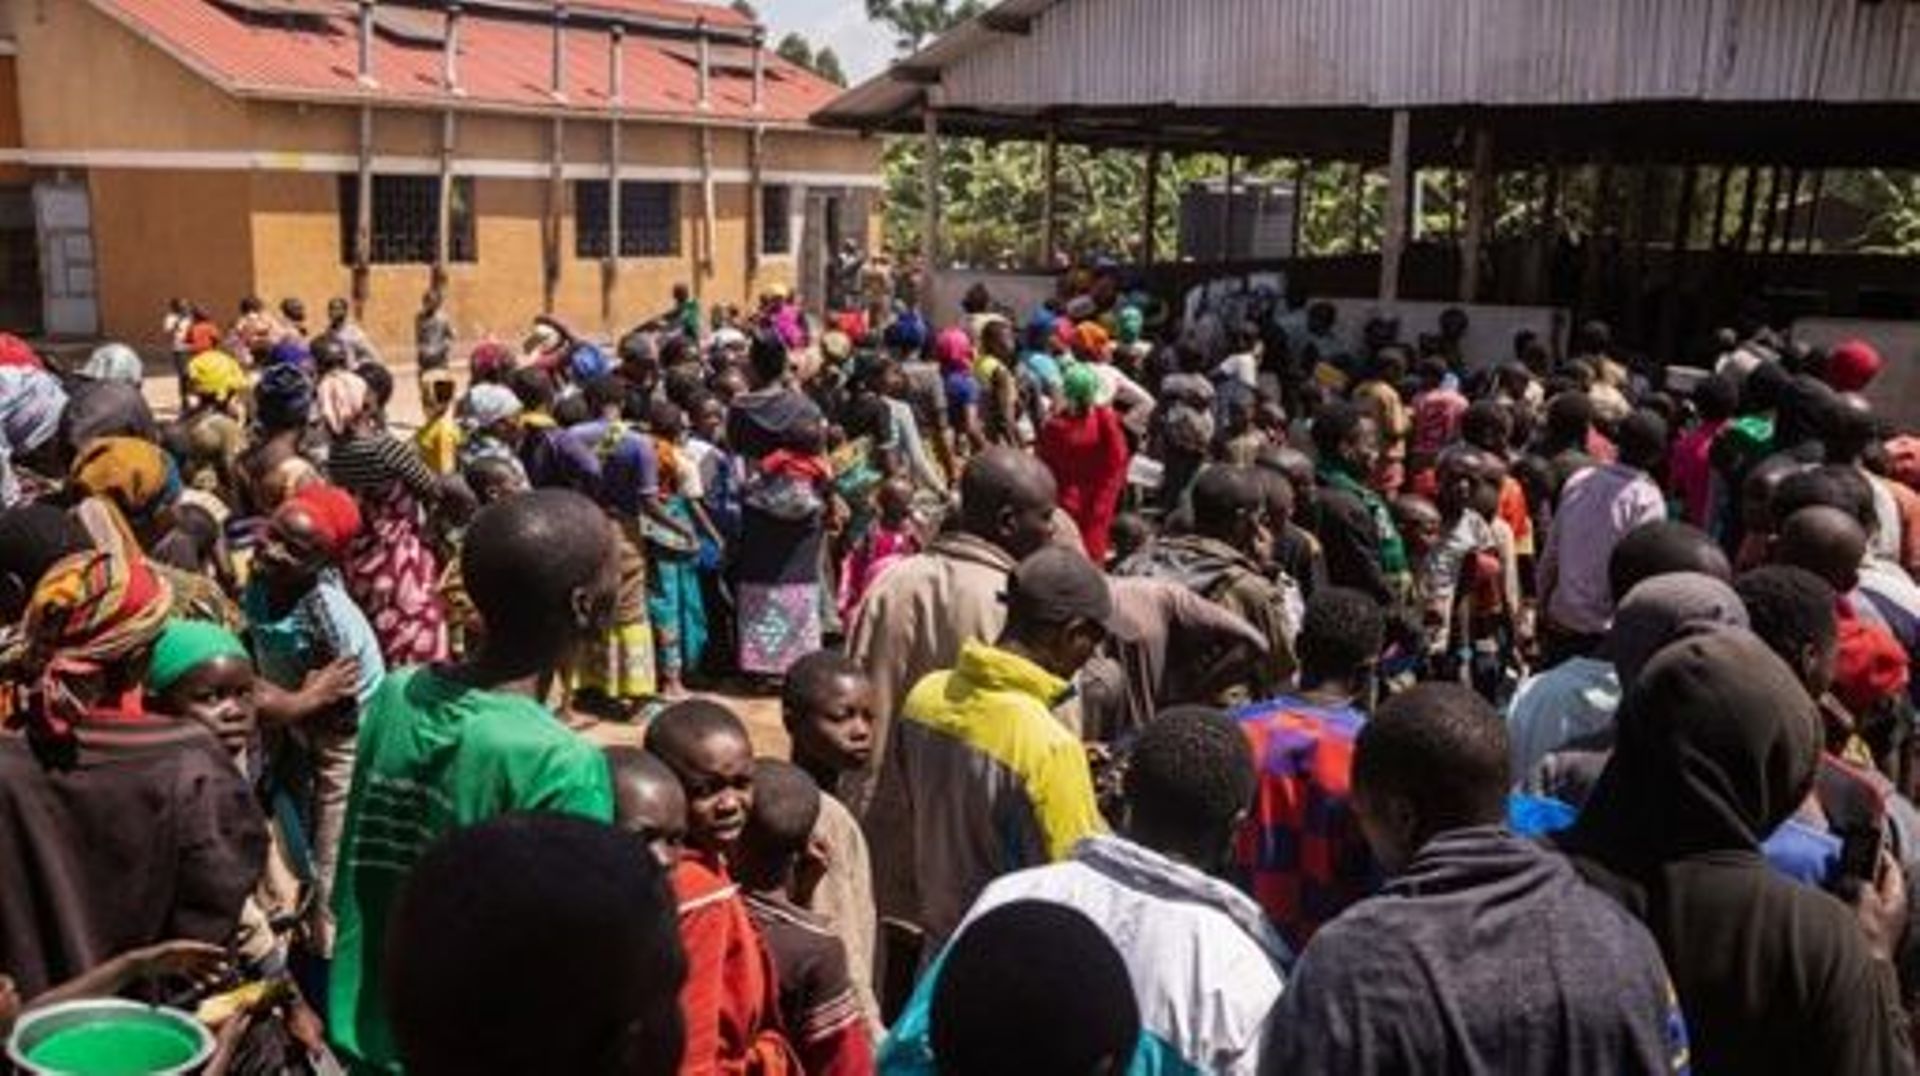 Refugees from the Democratic Republic of Congo (DRC) wait in lines for receiving lunch at the Nyakabande Transit Center in Kisoro, Uganda, June 7, 2022, following deadly fights between M23 rebels, one of more than 120 armed groups roaming eastern DRC, and